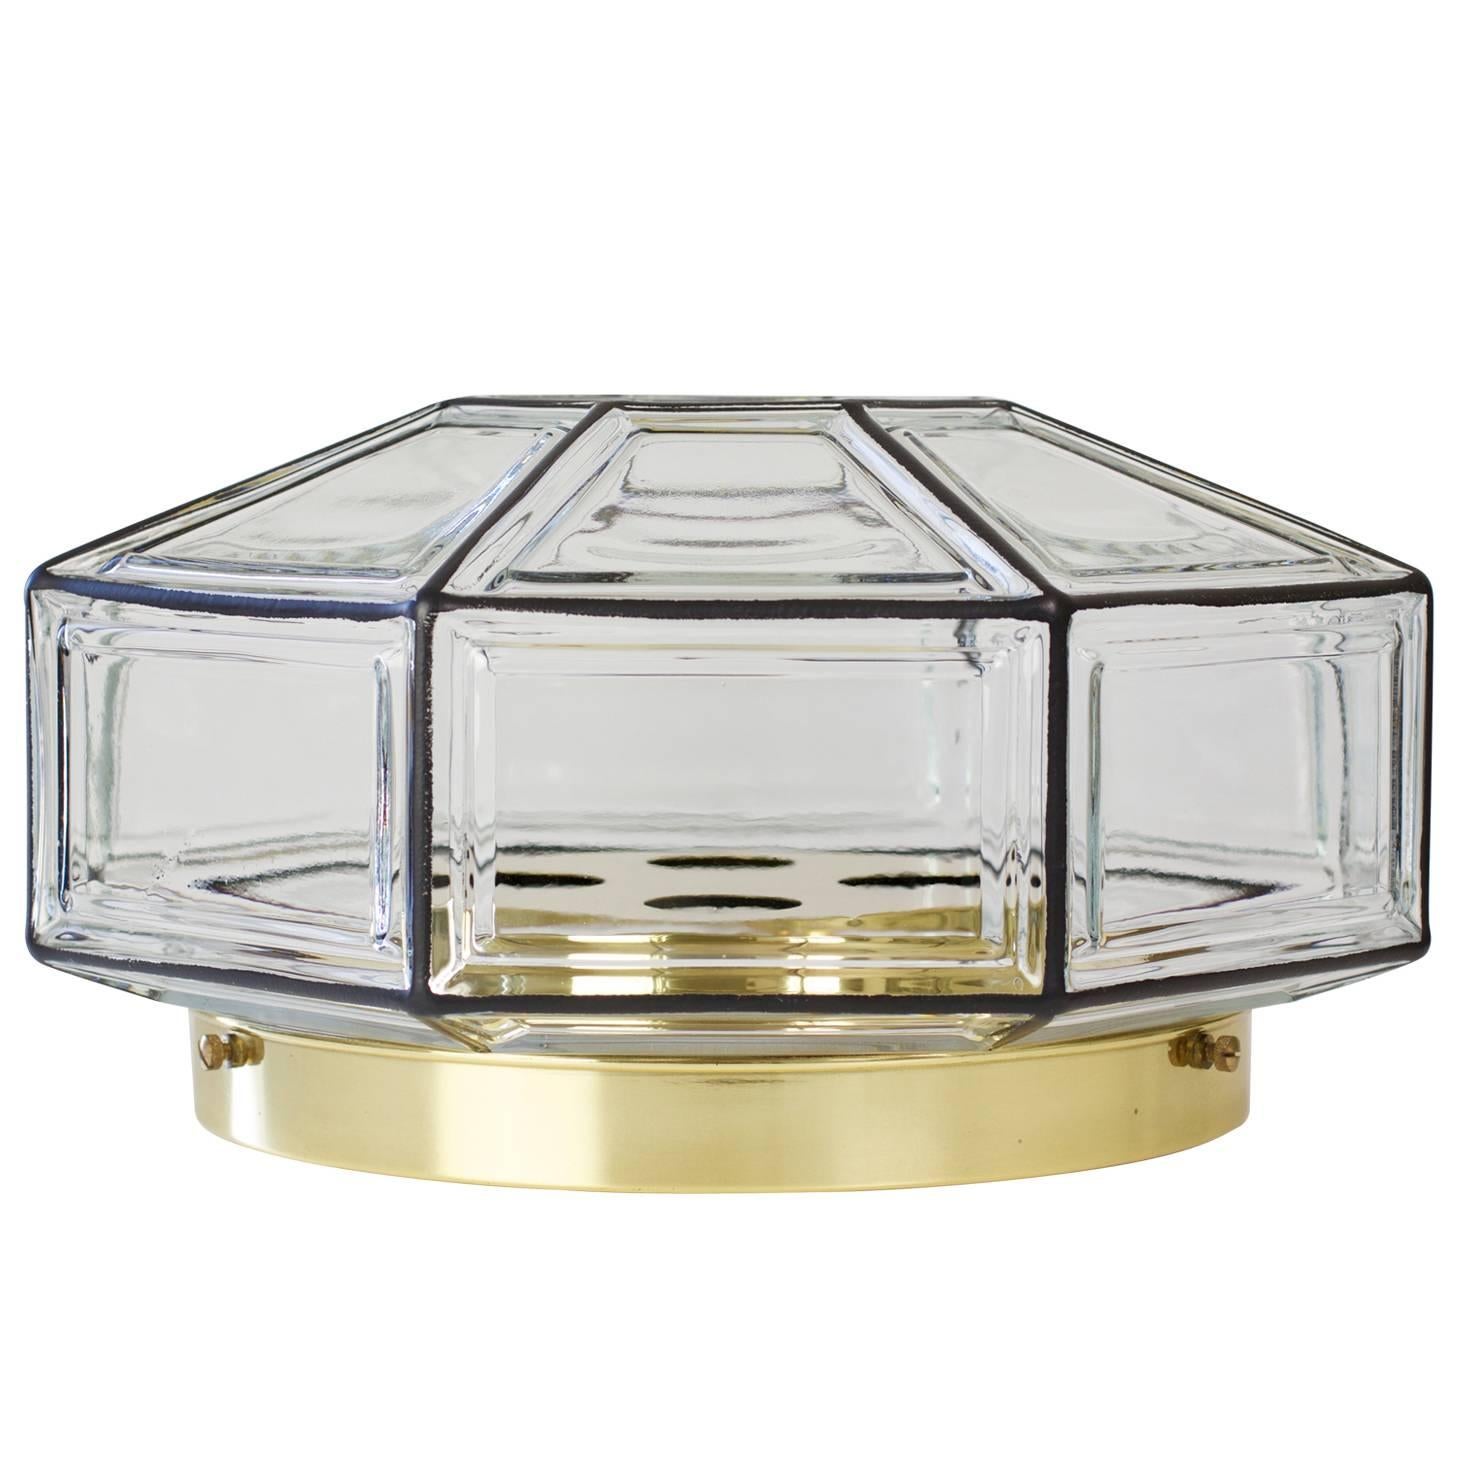 One of four extra large octagonally shaped, Mid-Century Modern and Minimalist German made flushmount light fixture produced by Glashütte Limburg, circa 1965. This Contemporary Art Deco and lantern style ceiling lamp casts a fantastic light when